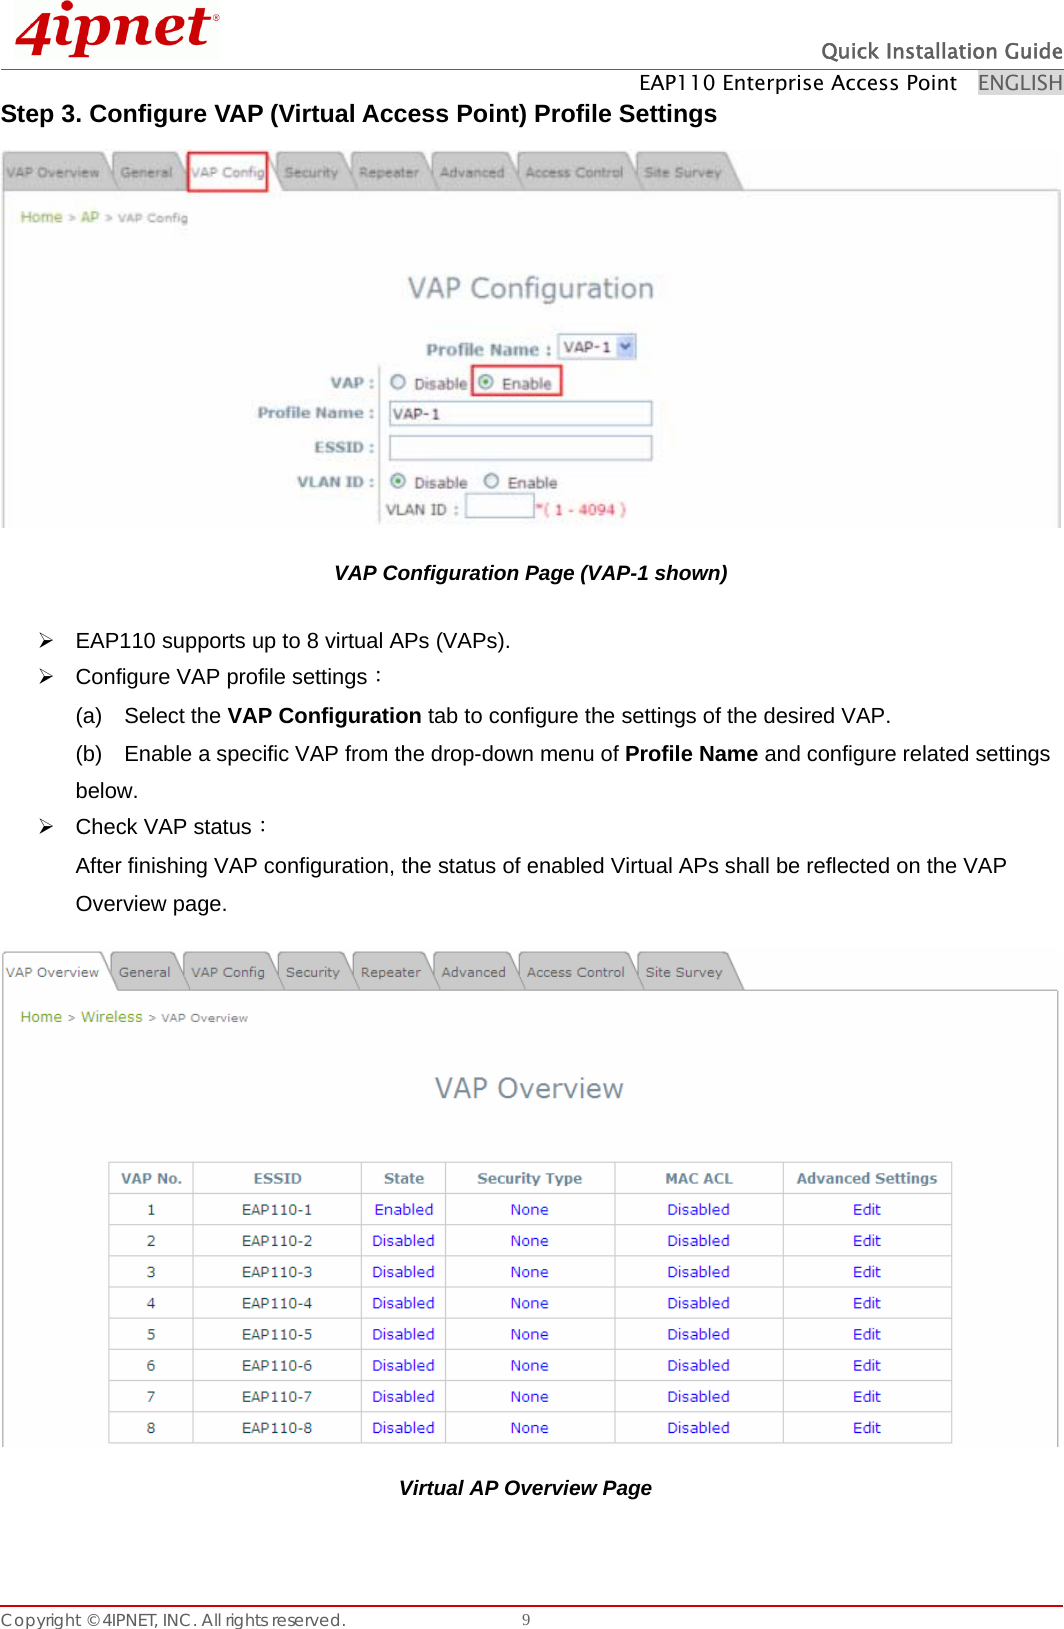  Quick Installation Guide EAP110 Enterprise Access Point    ENGLISH Copyright © 4IPNET, INC. All rights reserved.    9Step 3. Configure VAP (Virtual Access Point) Profile Settings   VAP Configuration Page (VAP-1 shown) ¾  EAP110 supports up to 8 virtual APs (VAPs).   ¾  Configure VAP profile settings： (a)  Select the VAP Configuration tab to configure the settings of the desired VAP.   (b)    Enable a specific VAP from the drop-down menu of Profile Name and configure related settings below. ¾ Check VAP status： After finishing VAP configuration, the status of enabled Virtual APs shall be reflected on the VAP Overview page.    Virtual AP Overview Page 